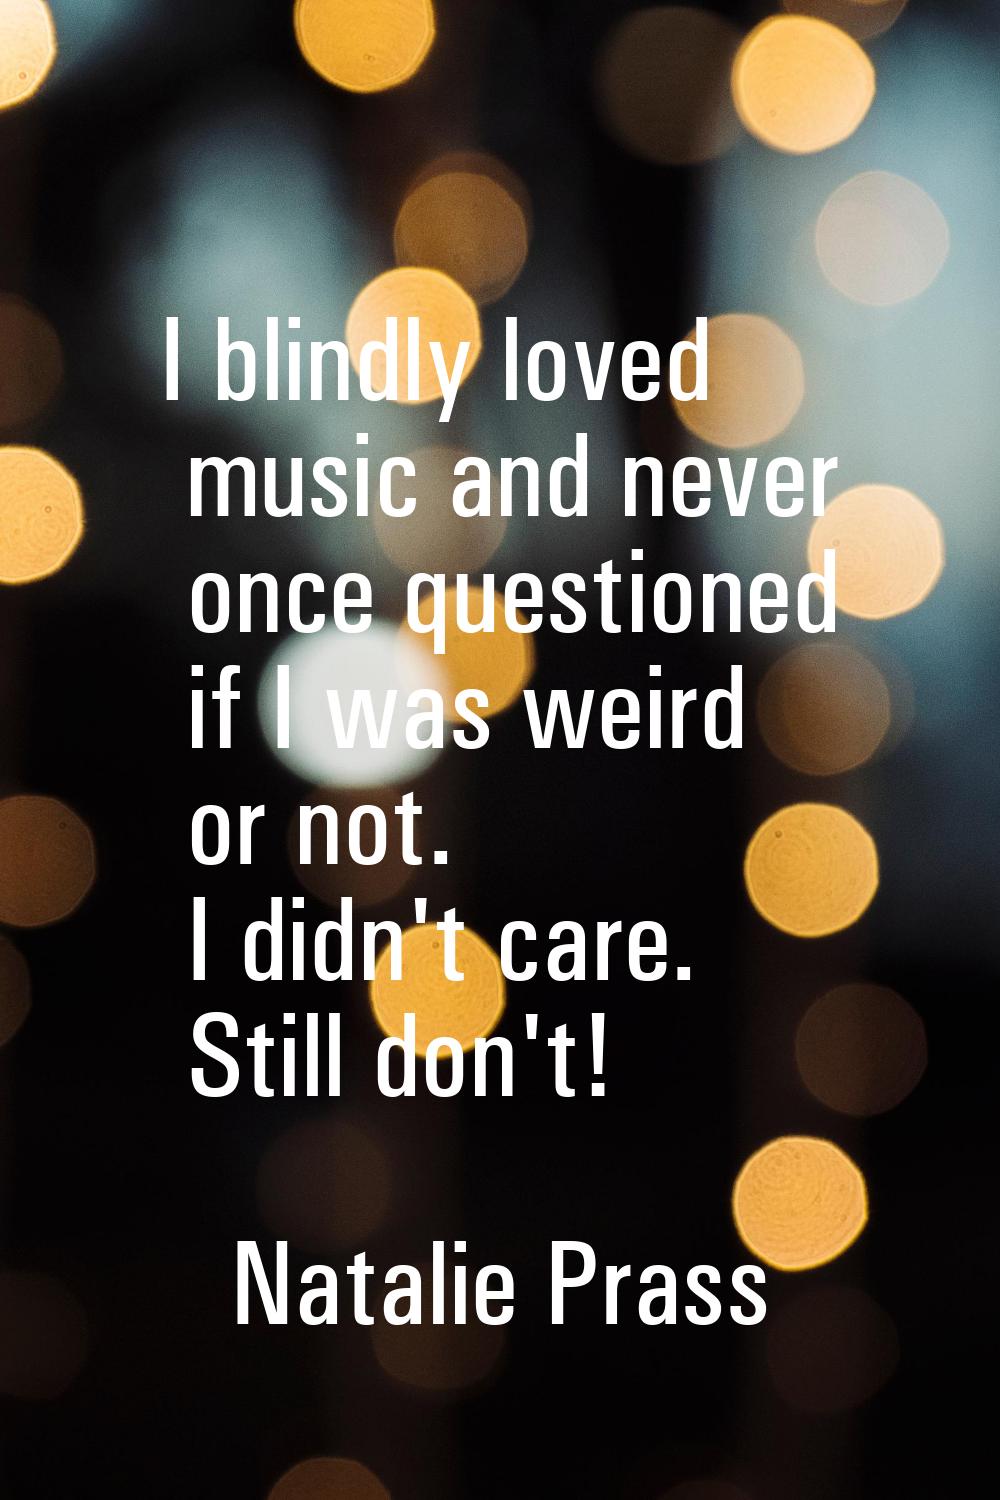 I blindly loved music and never once questioned if I was weird or not. I didn't care. Still don't!